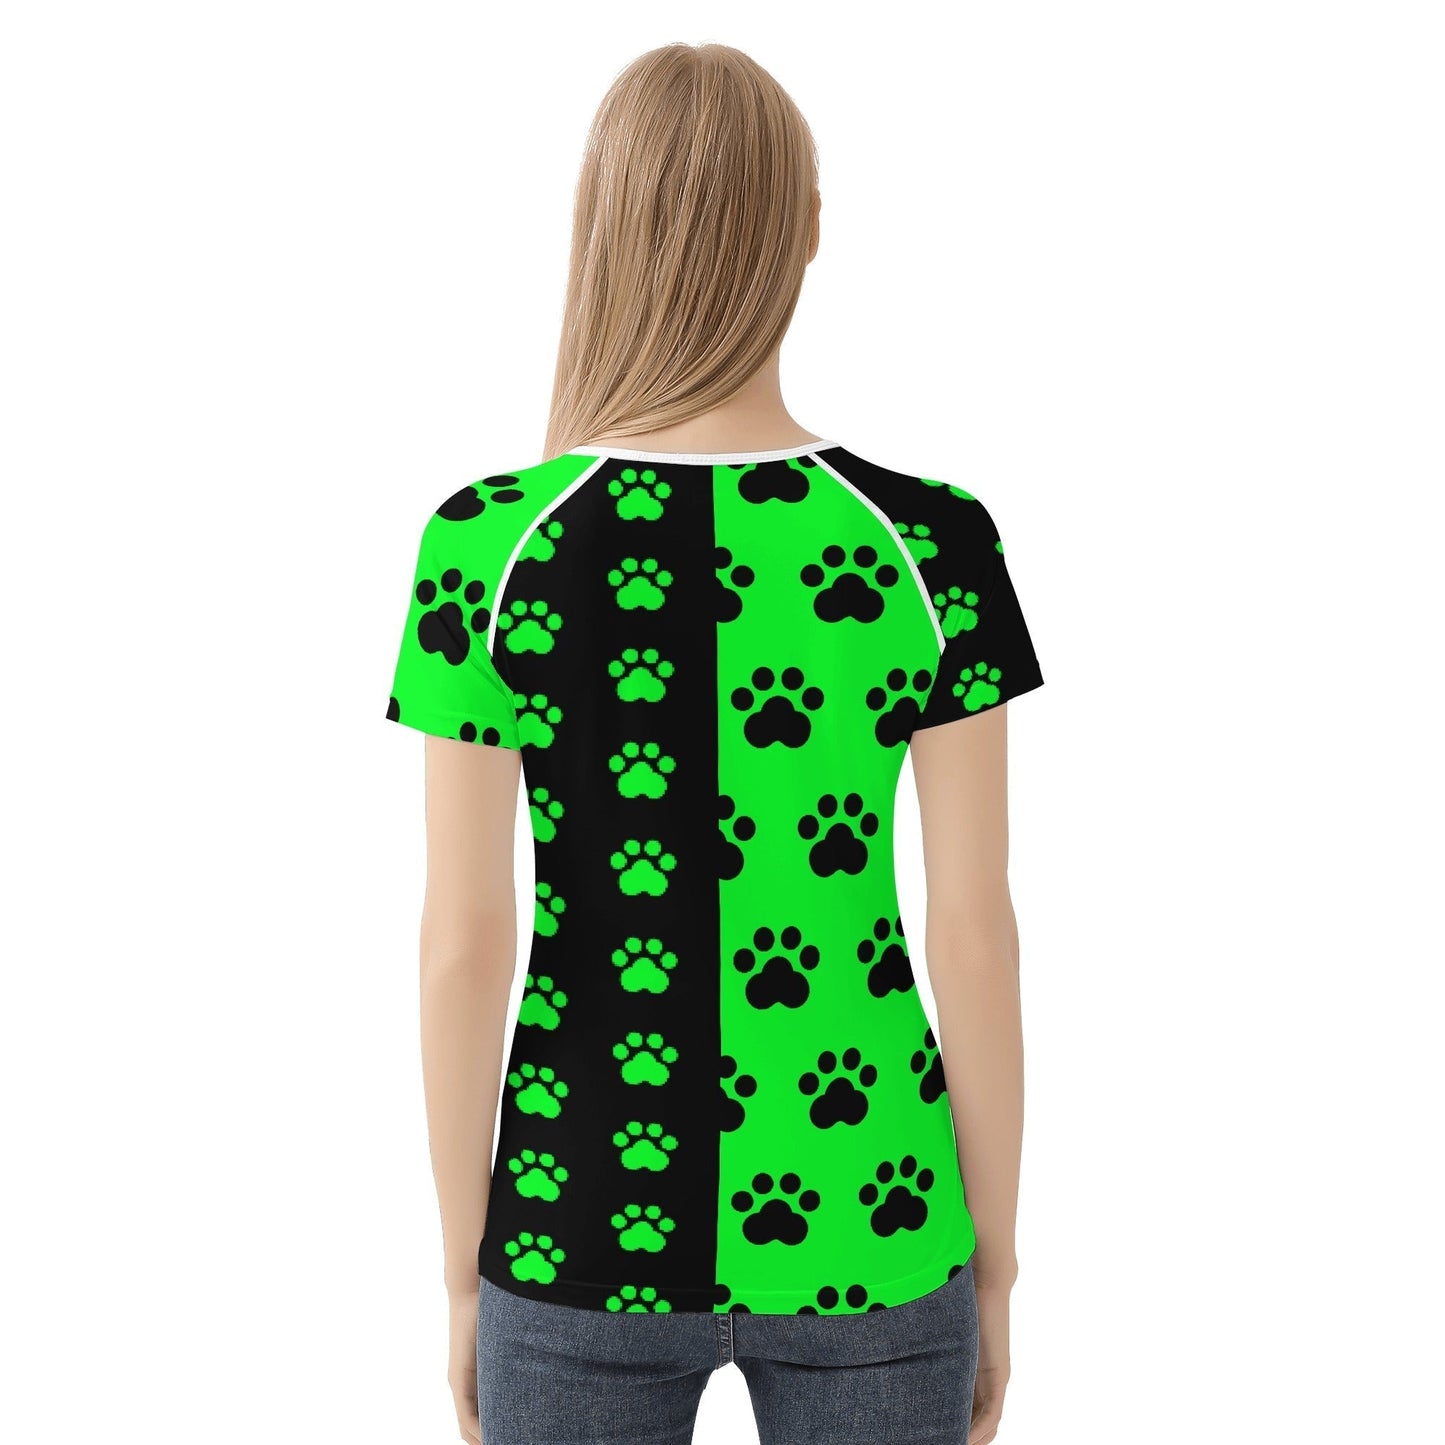 Stand out  with the  2 Tone Womens T shirt  available at Hey Nugget. Grab yours today!